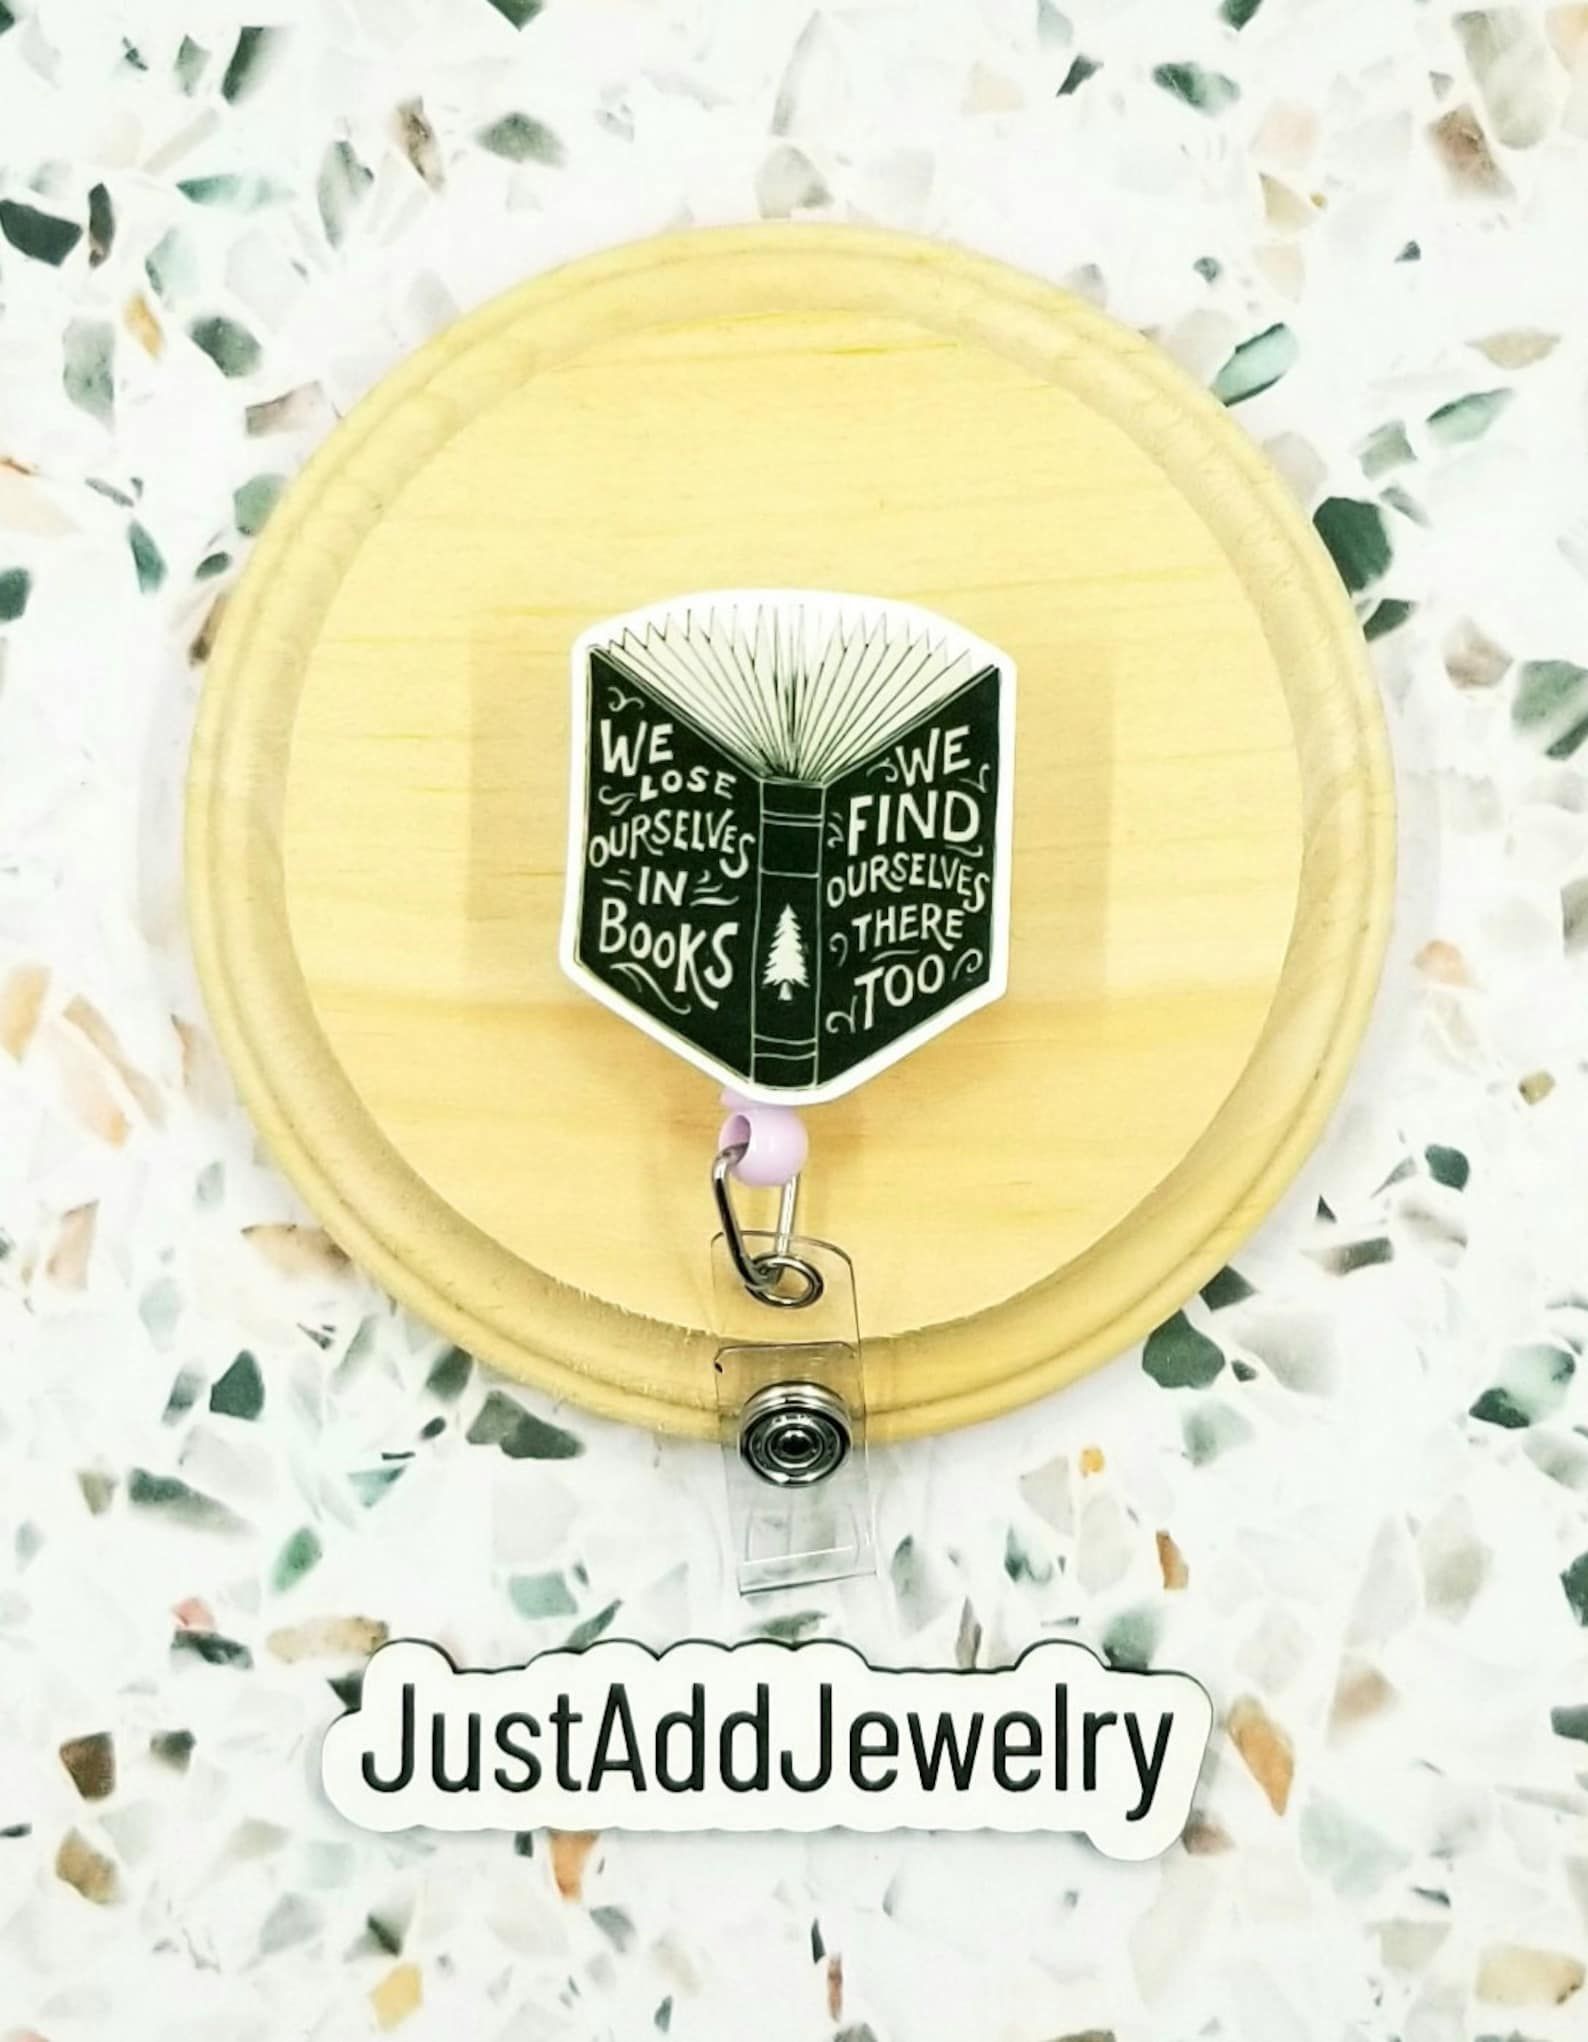 A badge reel that is an open book with the words "We lose ourselves in books, we find ourselves there too."